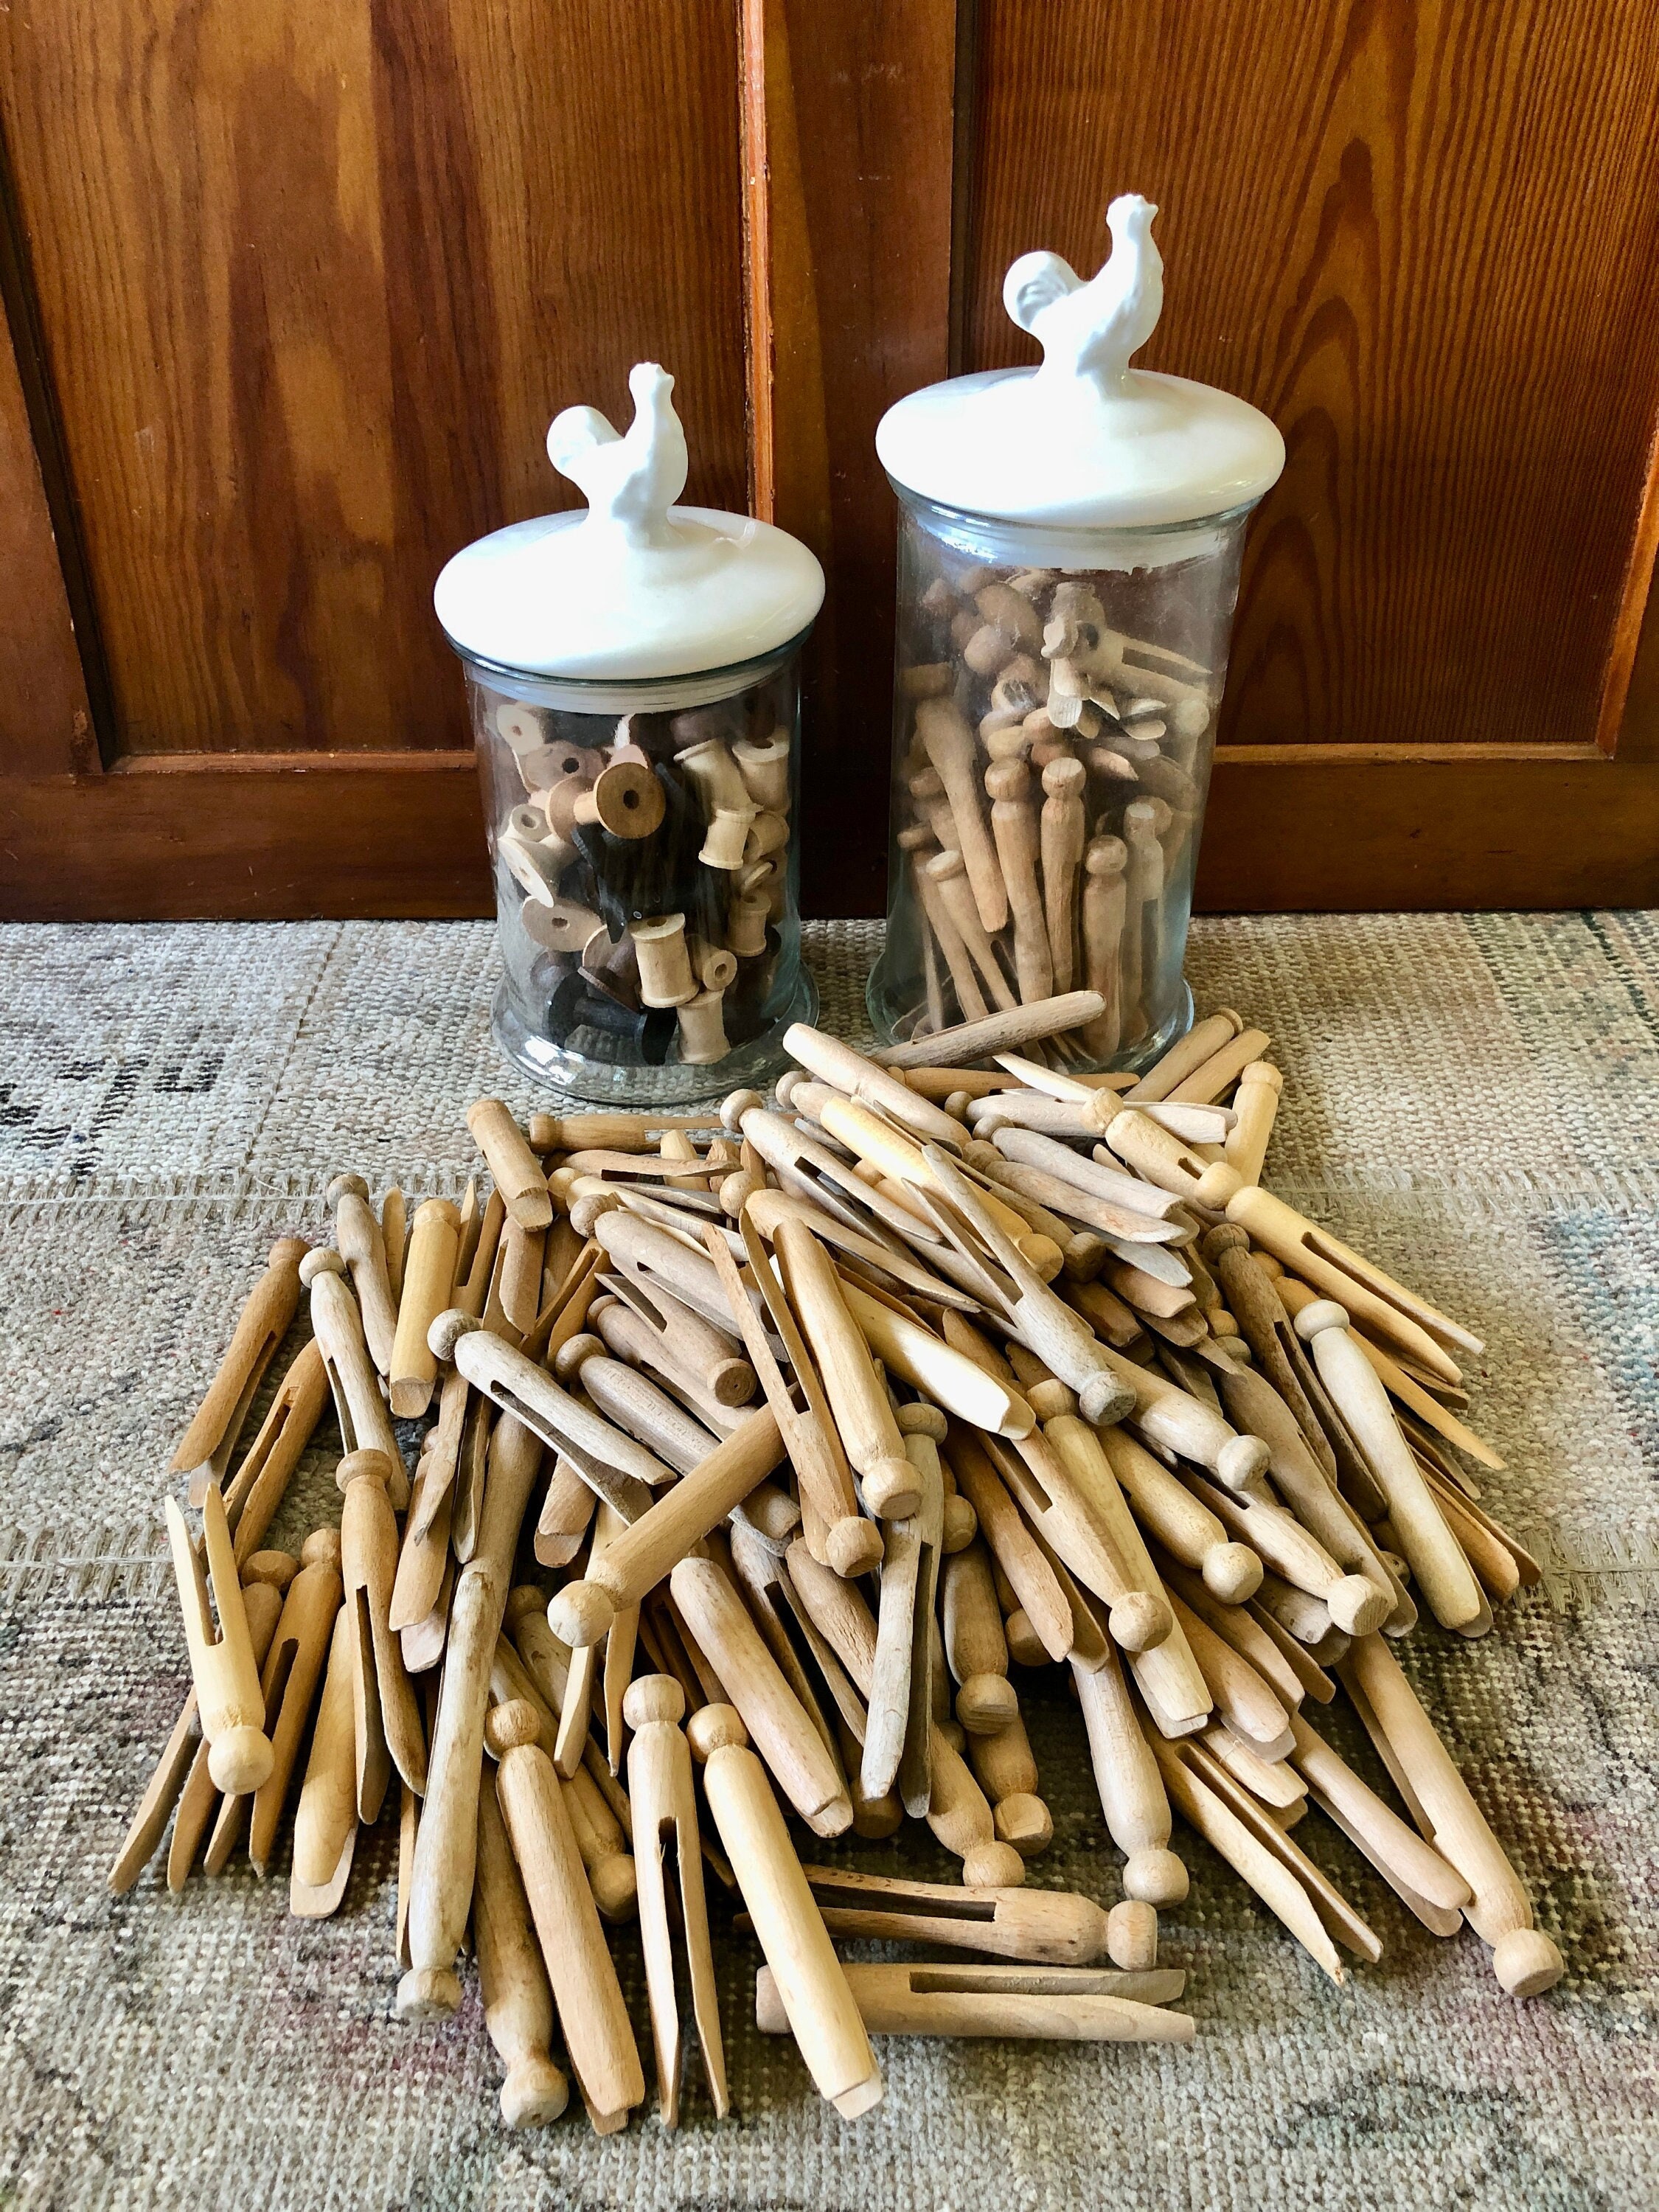 Vintage Lot of 37 Wooden Clothes Pins Rounded w/ Orange Paint Clothespins  Wood